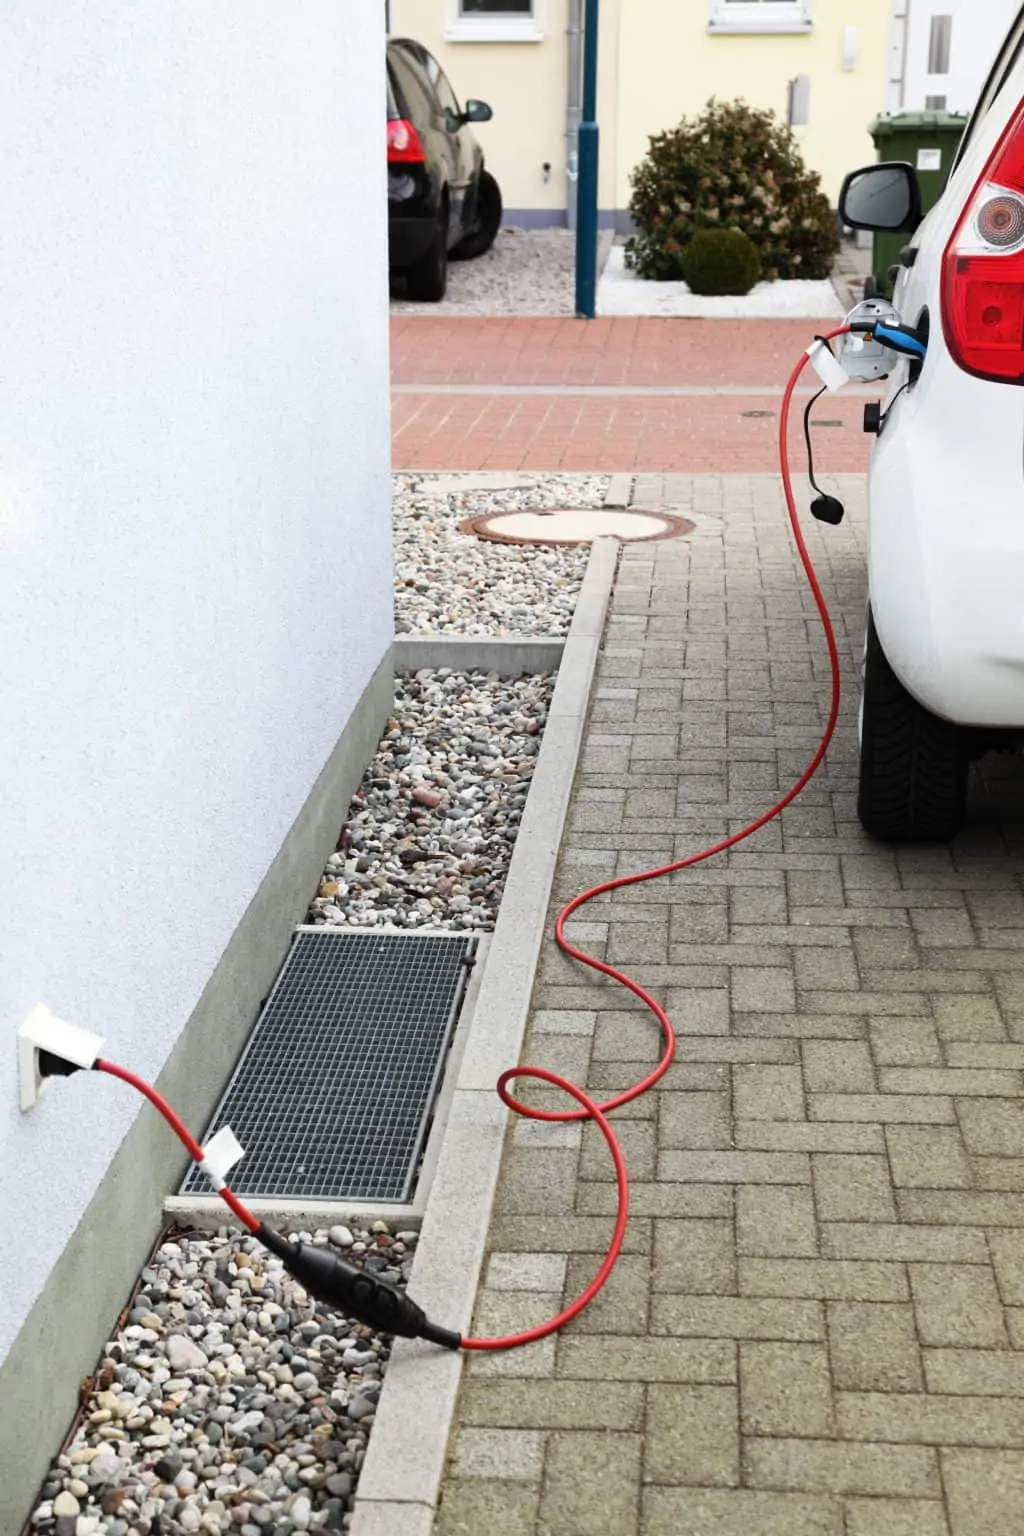 type 1 electric vehicle home charging station